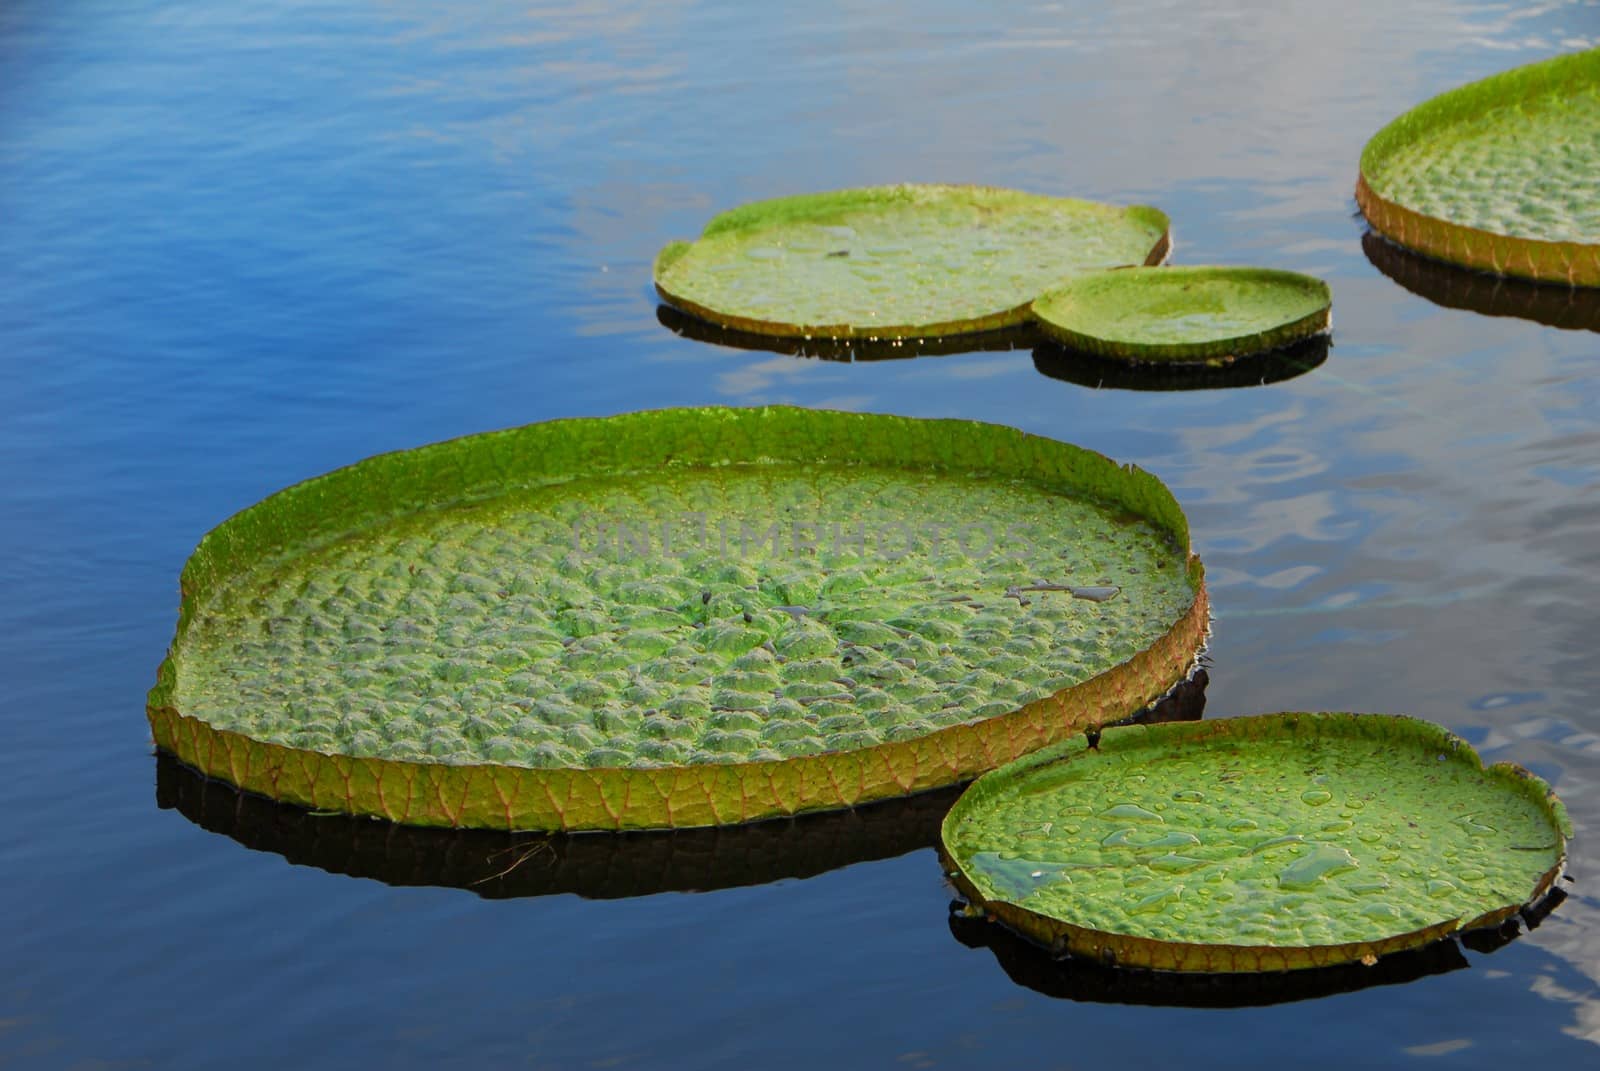 water lily leaves by nikonite